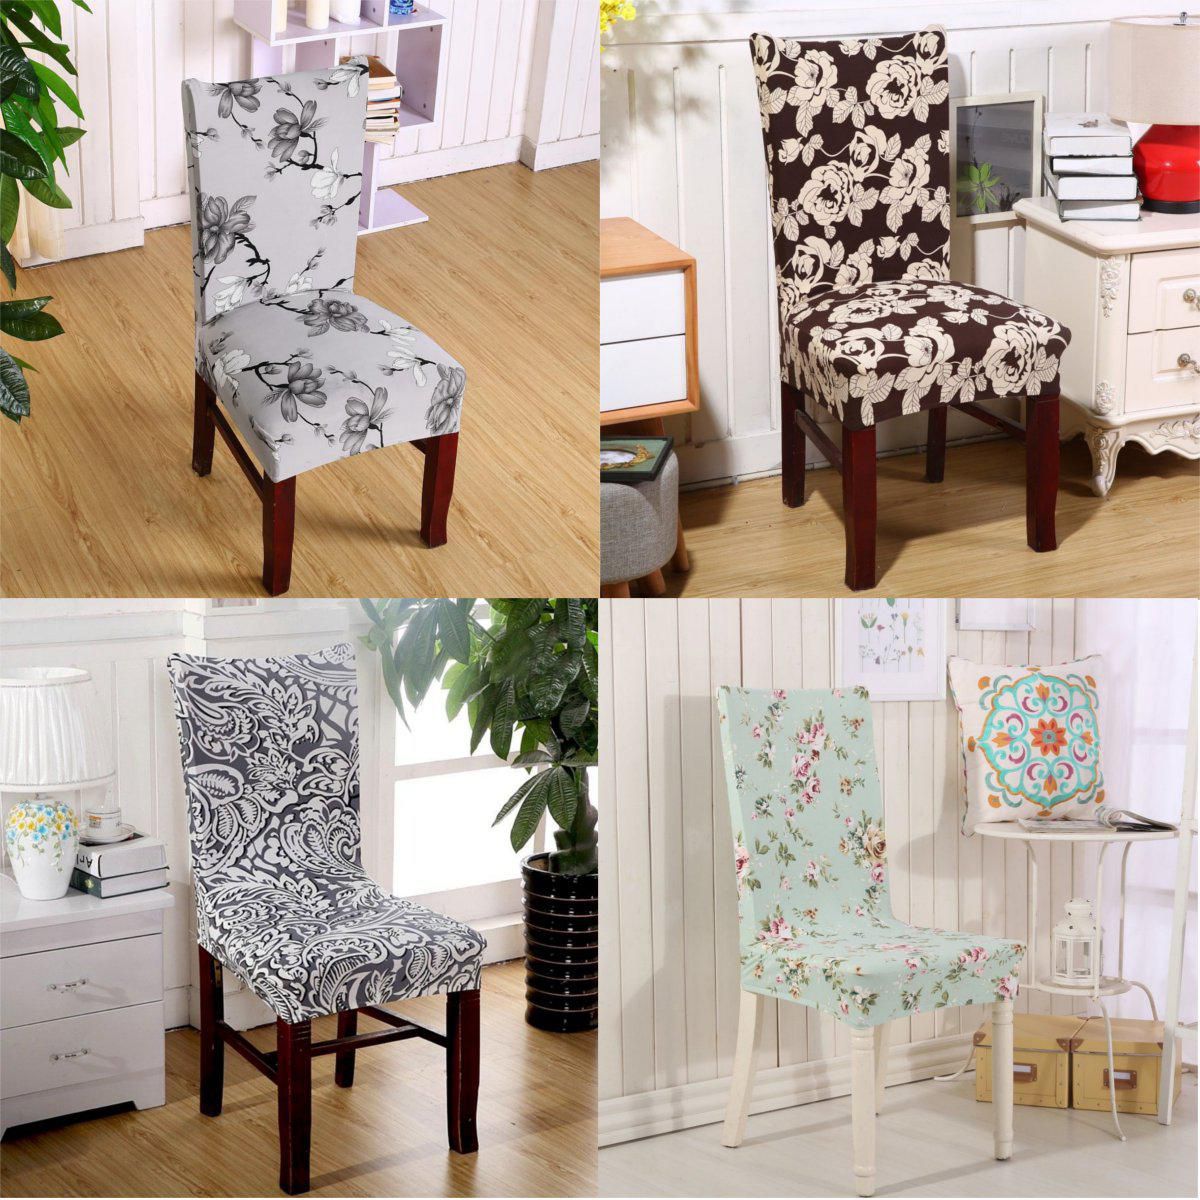 Dining Room Chair Seat Cover Decor, Best Dining Room Chair Seat Covers India